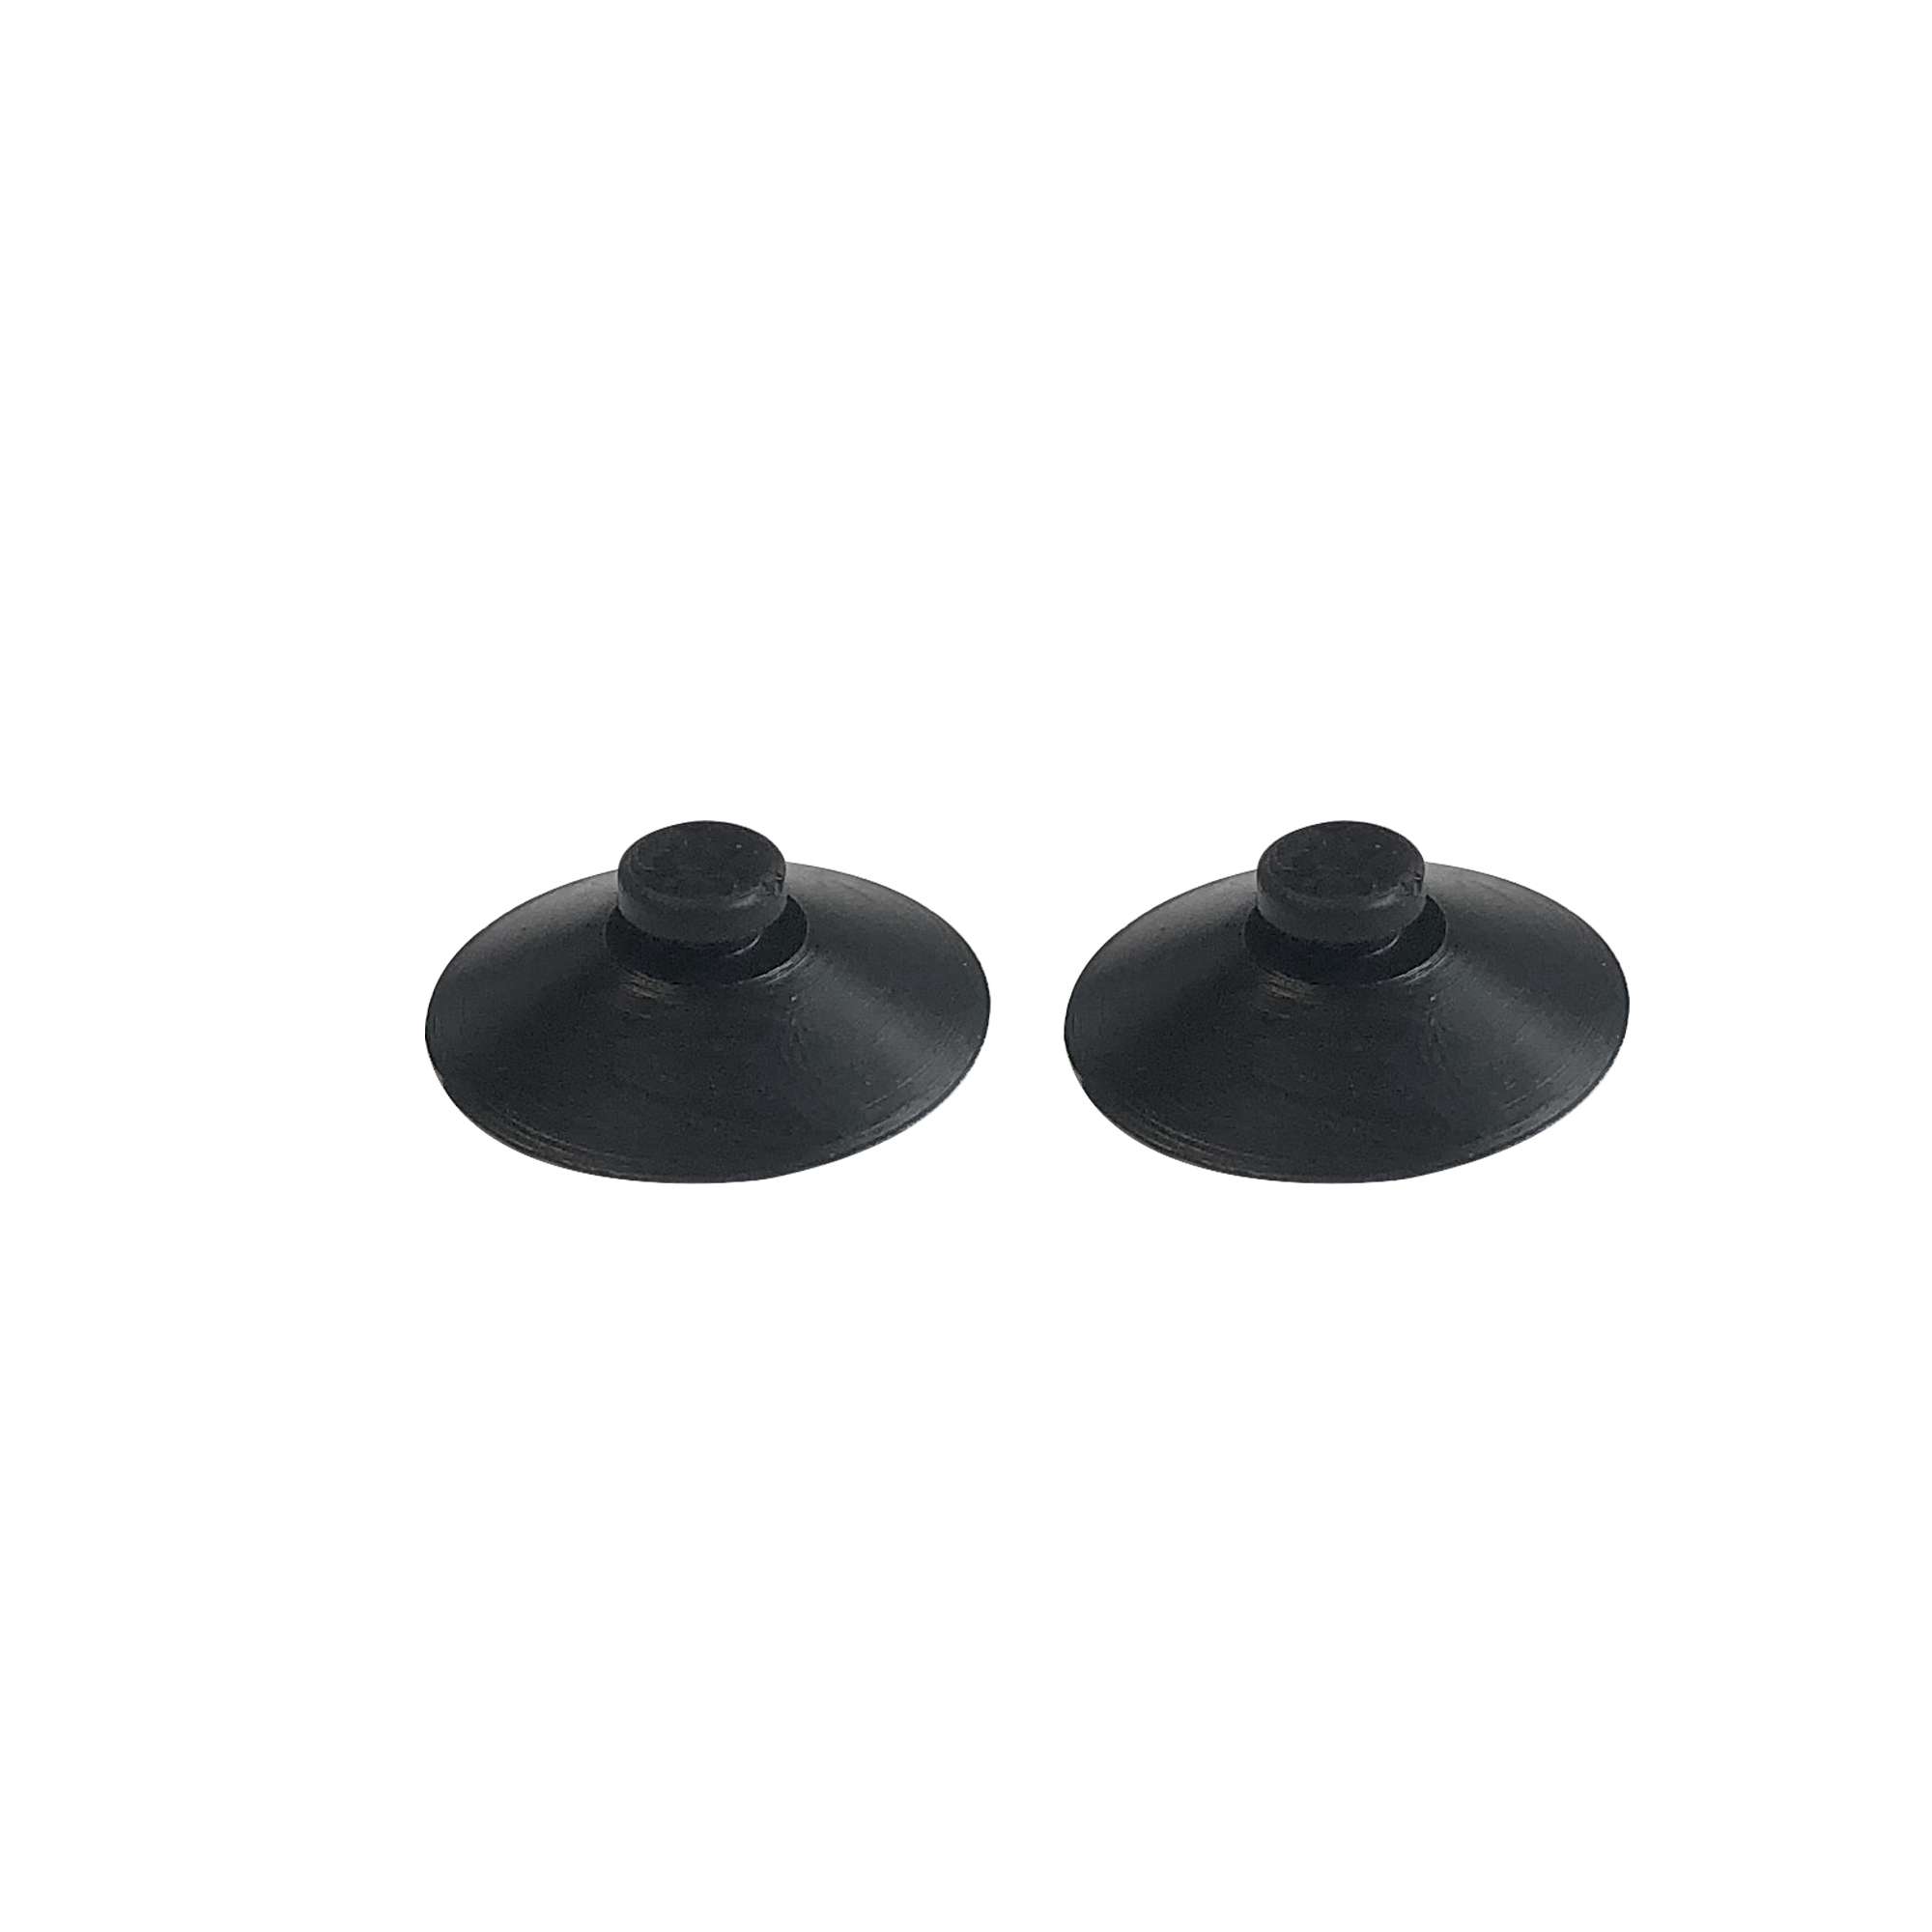 Suction cup for heating Visitherm mini UK